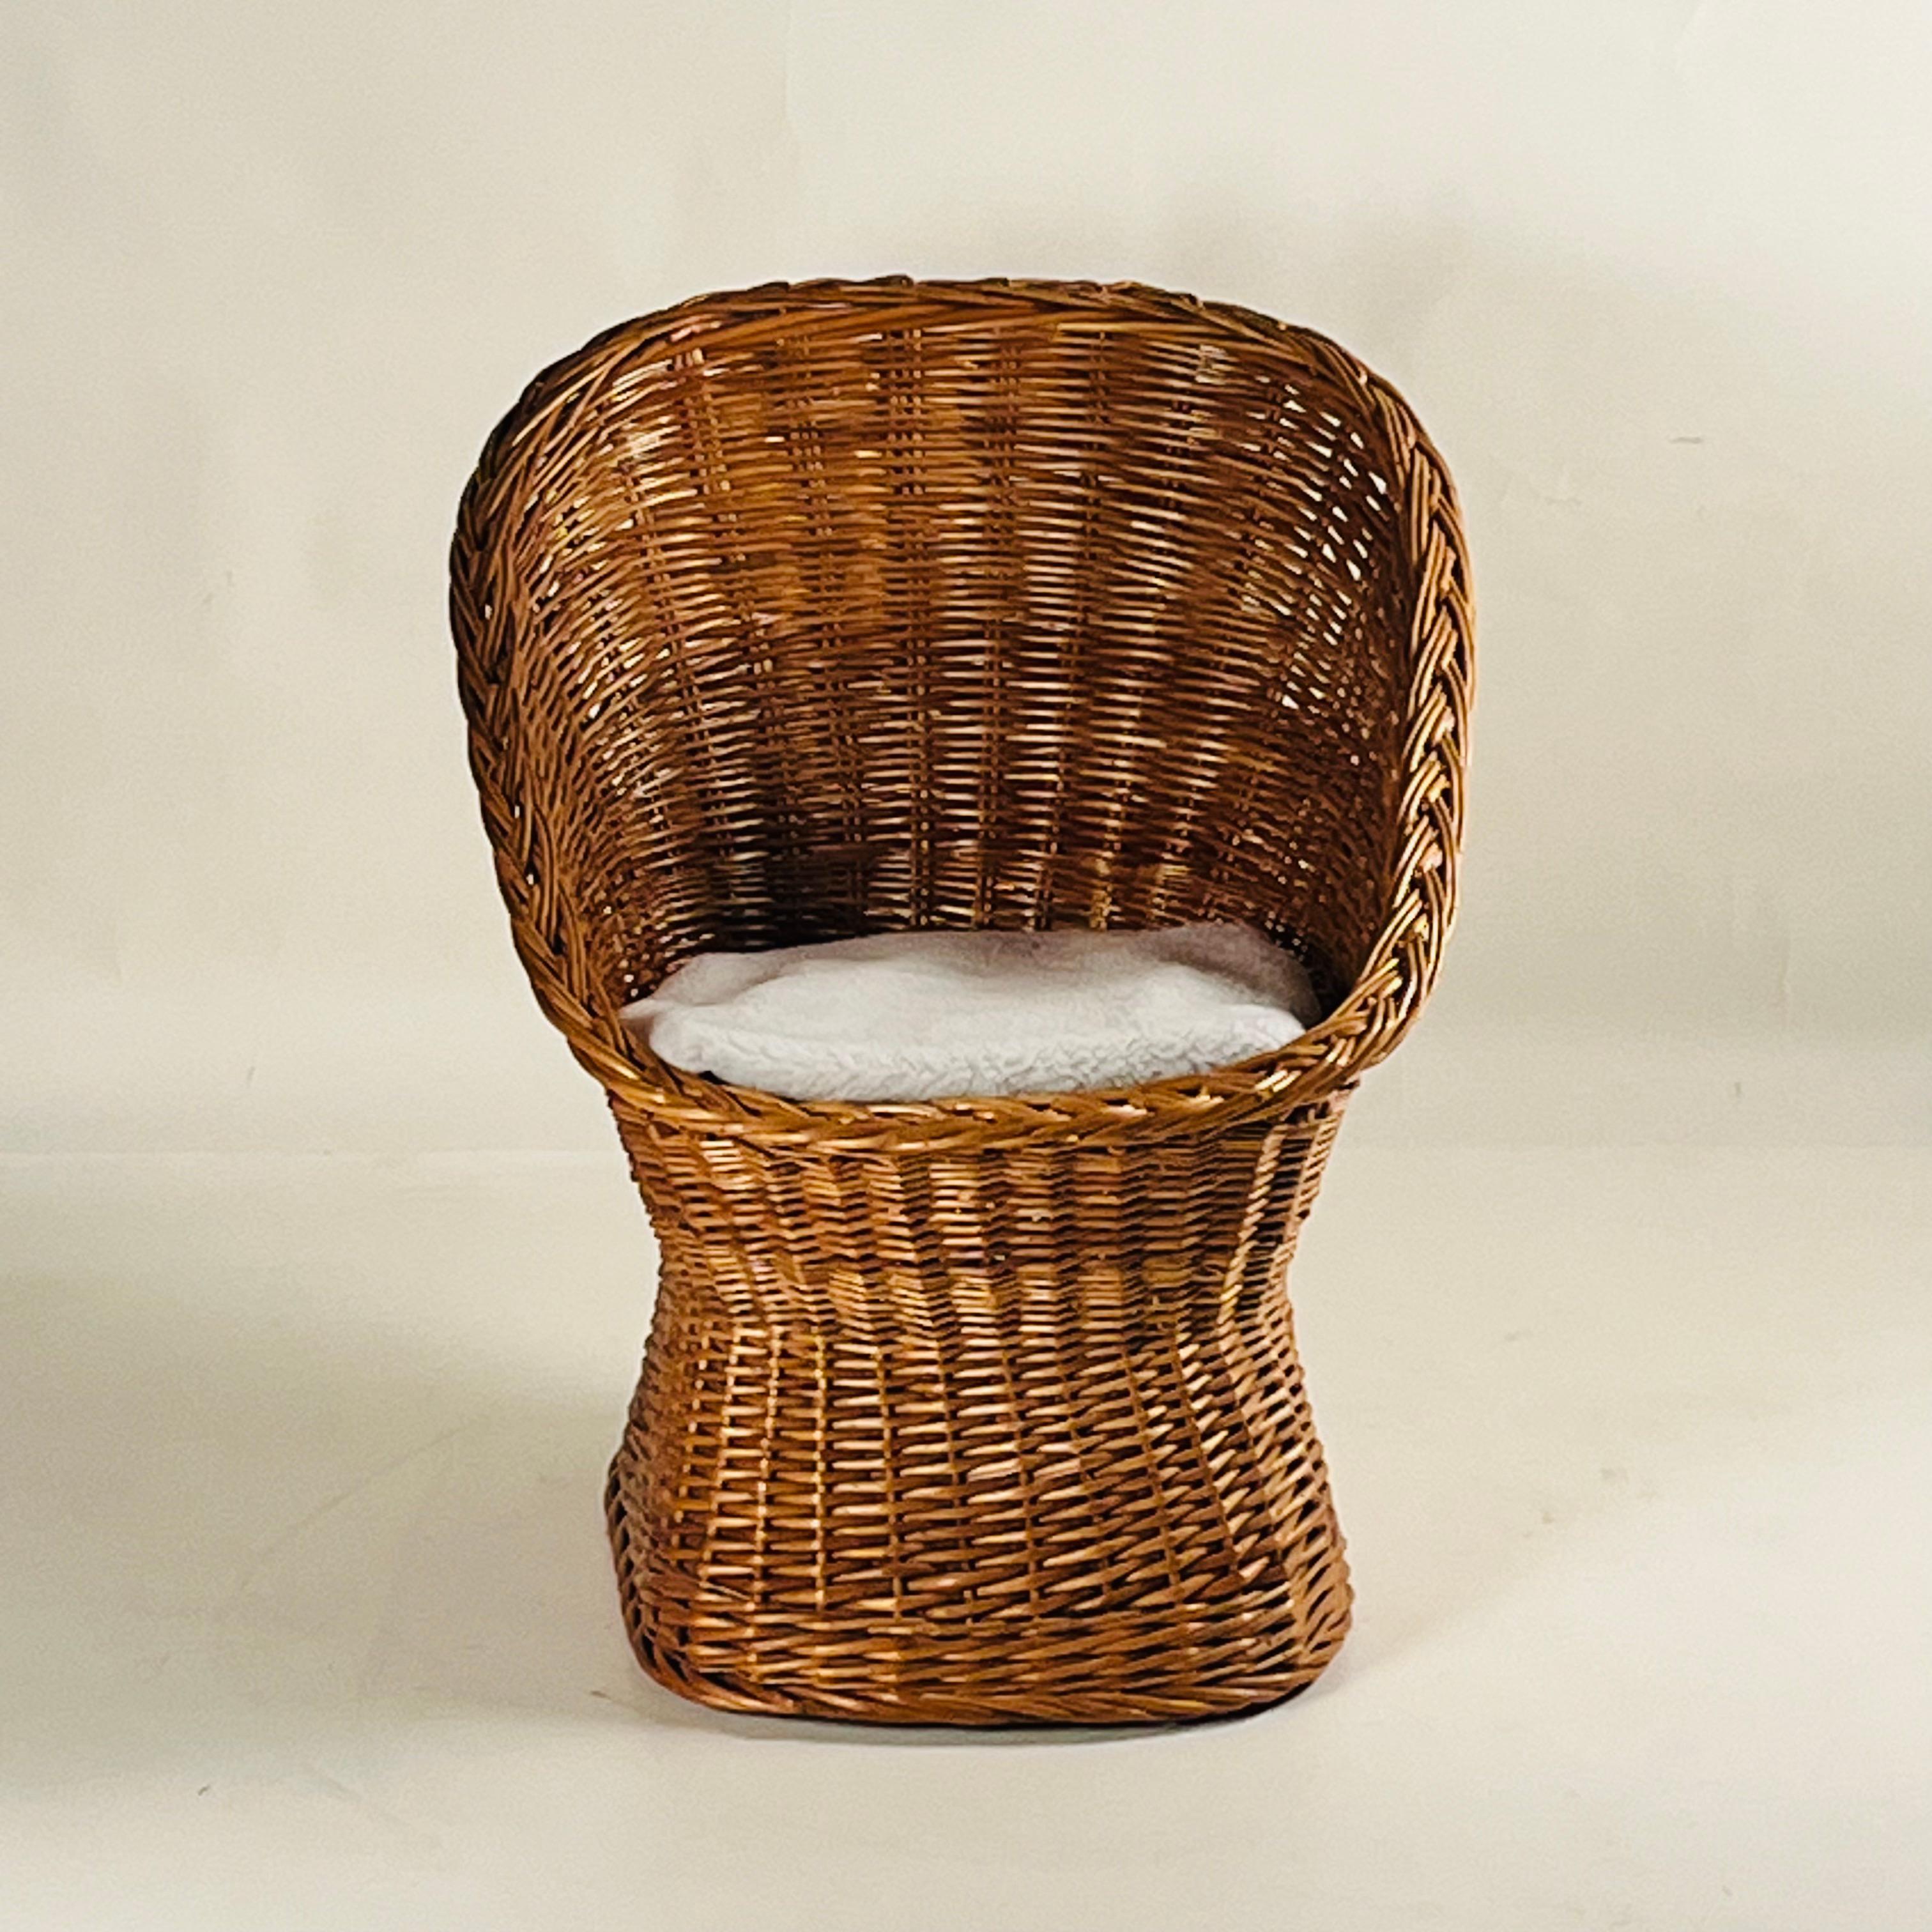 Woven Rattan Wicker Barrel Chair with Shearling Pad For Sale 8